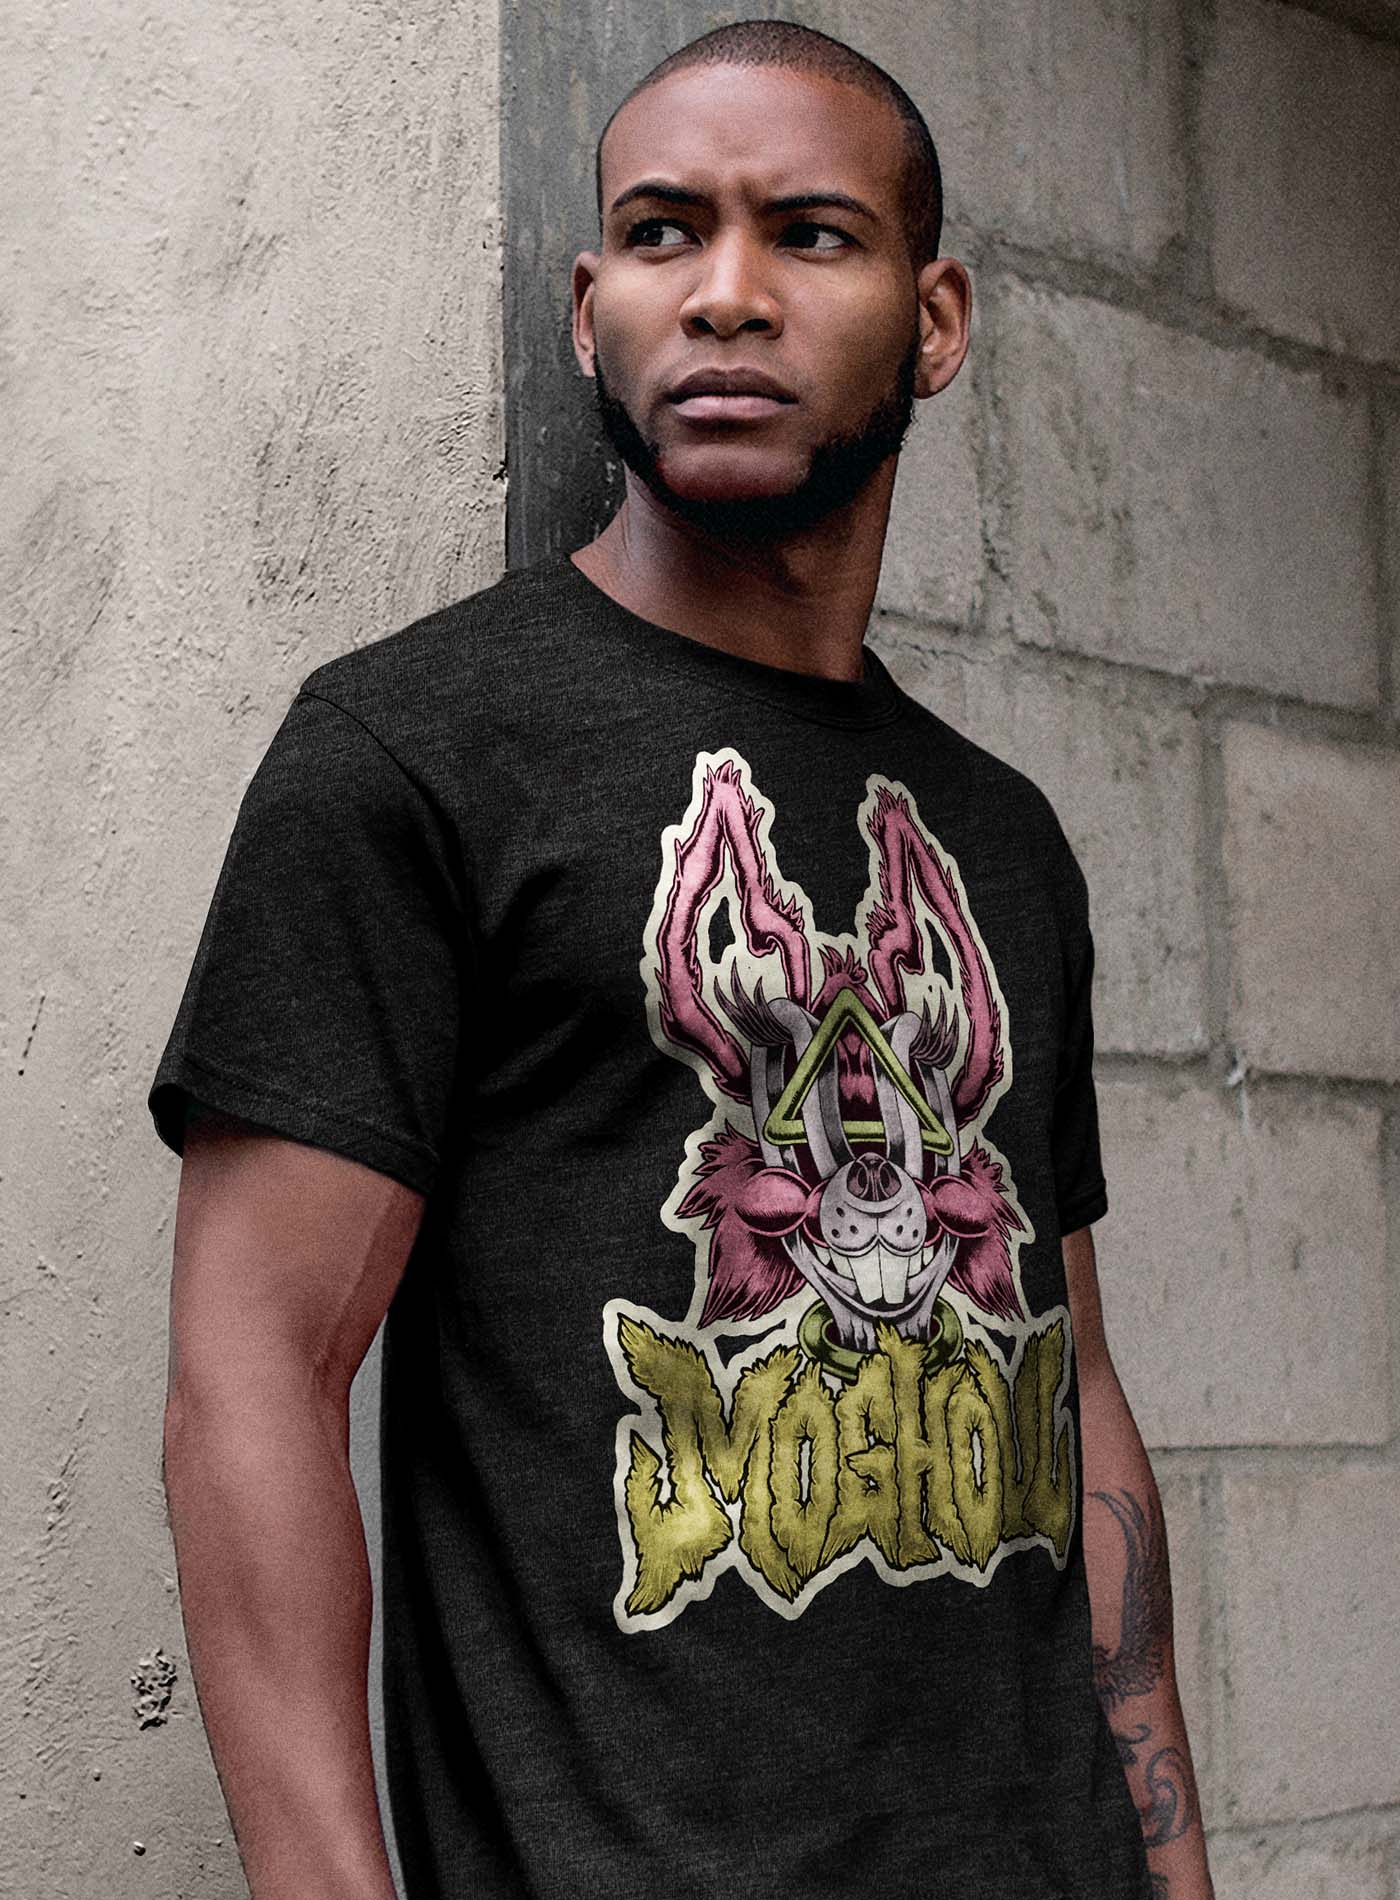 man modeling a Heather black unisex t-shirt featuring a front print of a dog and the Moghoul logo rendered in urban art style by Jason Hankins aka Jazmo.